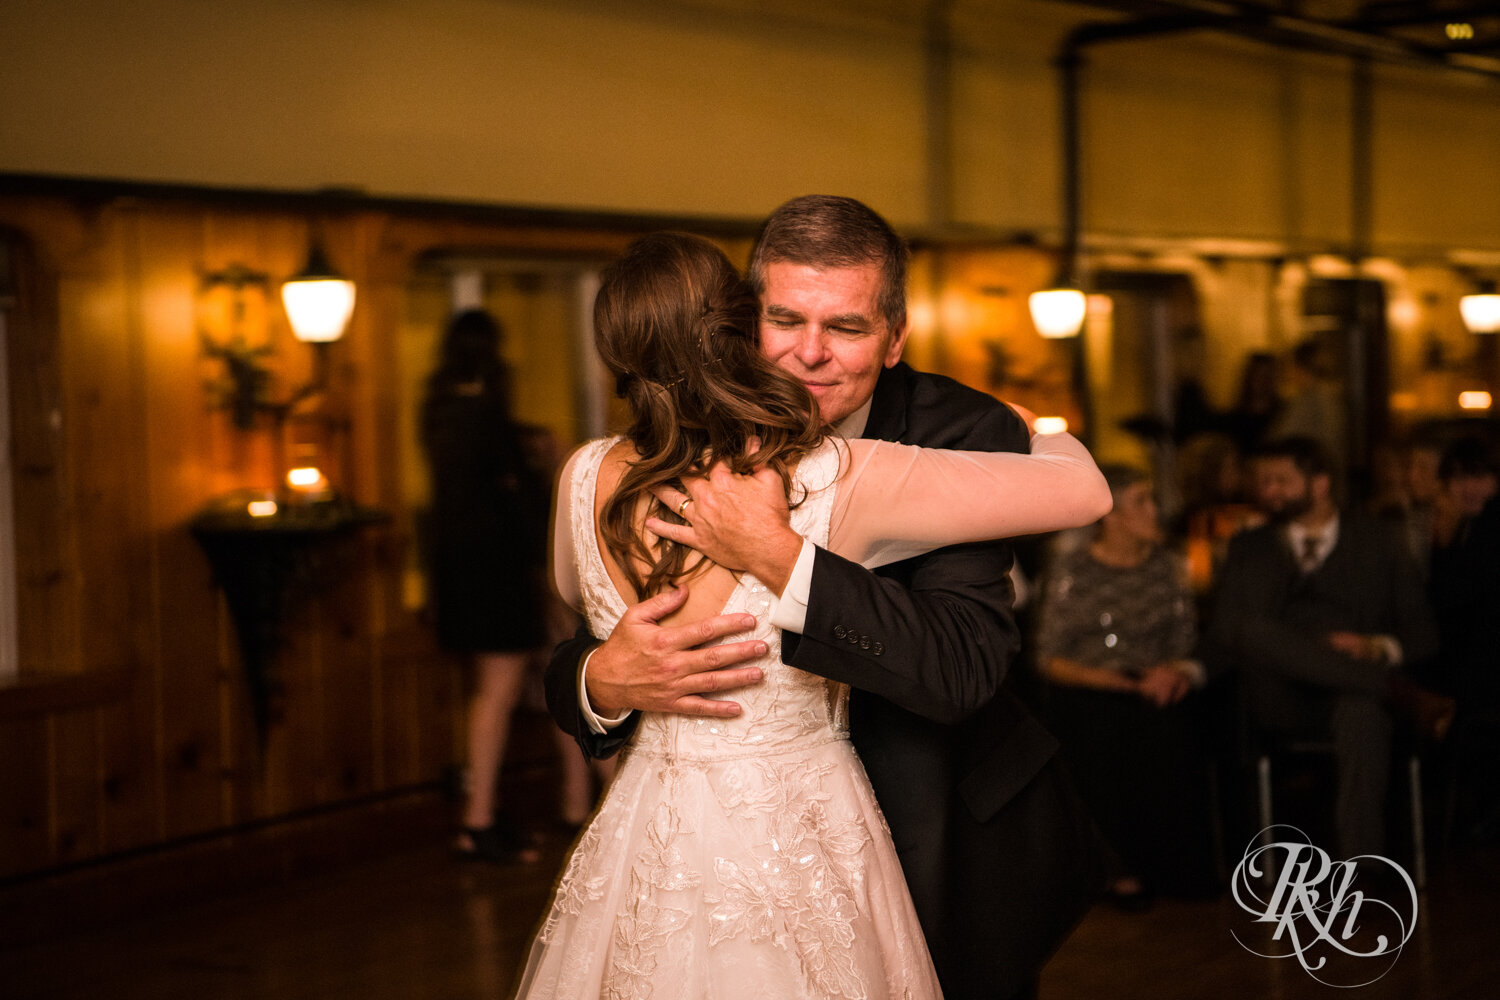 Bride and her dad dance at wedding reception at Kellerman's Event Center in White Bear Lake, Minnesota.